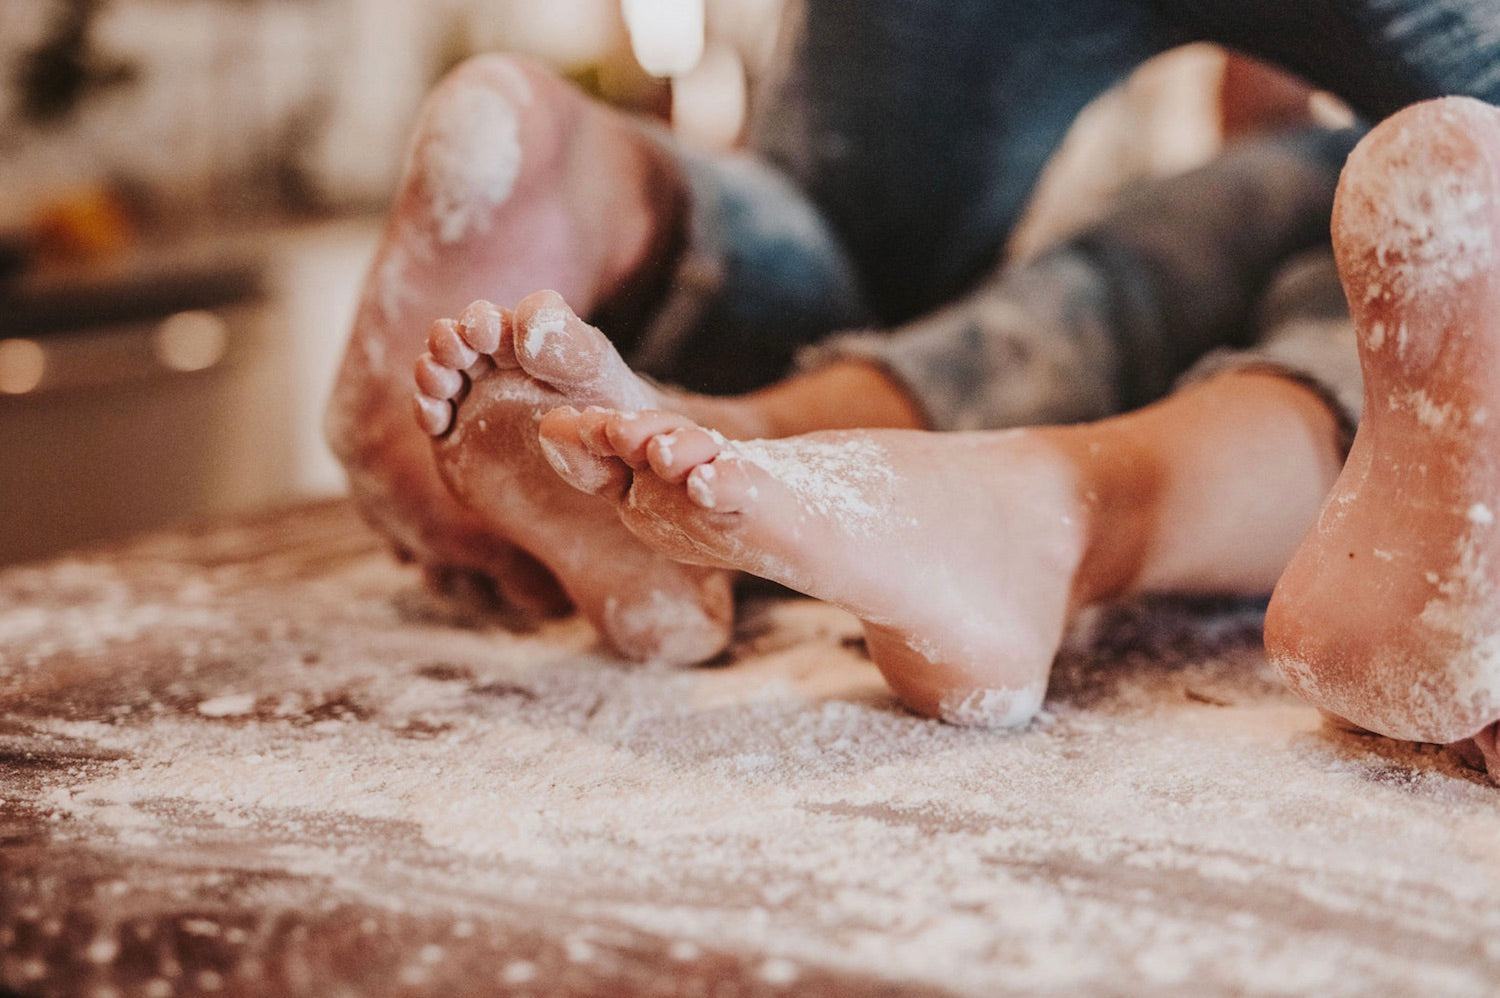 10 Romantic and Fun Sex Ideas for Couples Celebrating an Anniversary. Close-up shot of couple's feet on the kitchen table covered in flour.